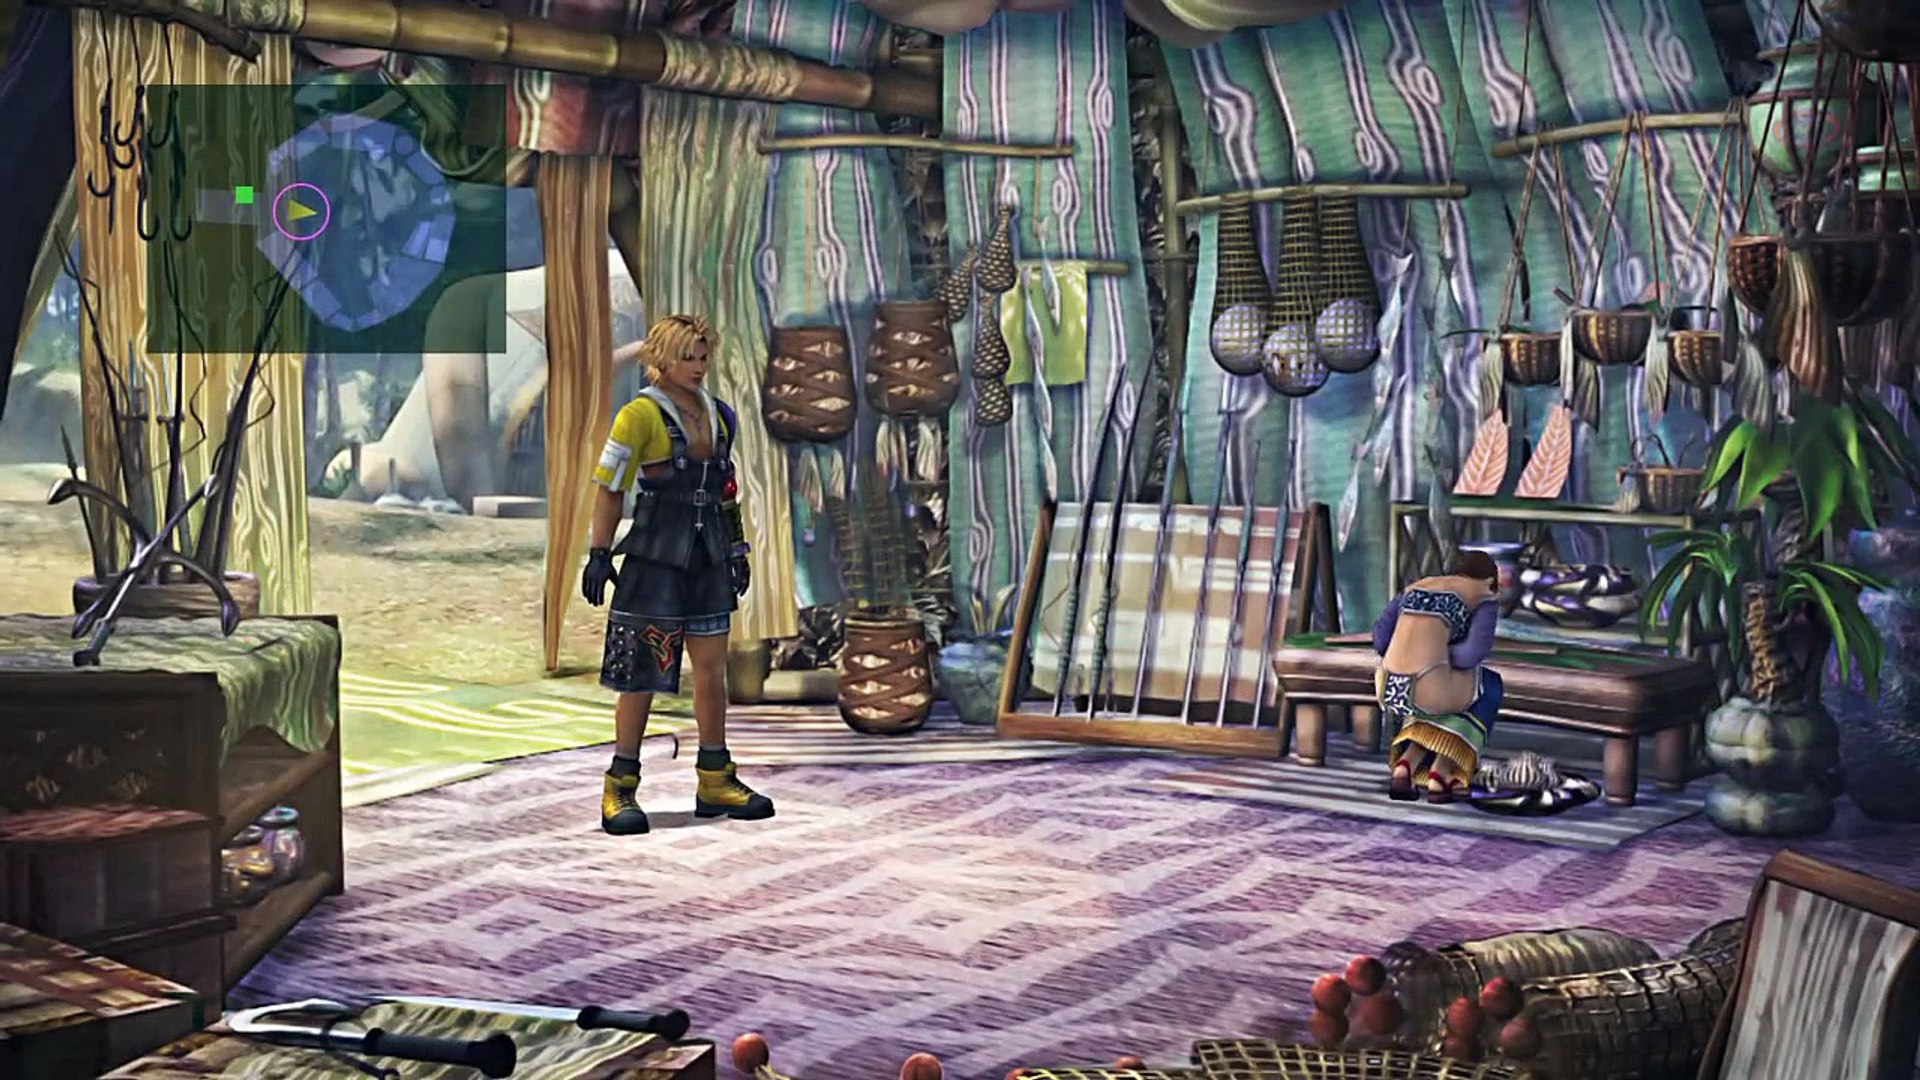 Final Fantasy X X 2 Hd Remaster Valefor Second Overdrive Video Dailymotion